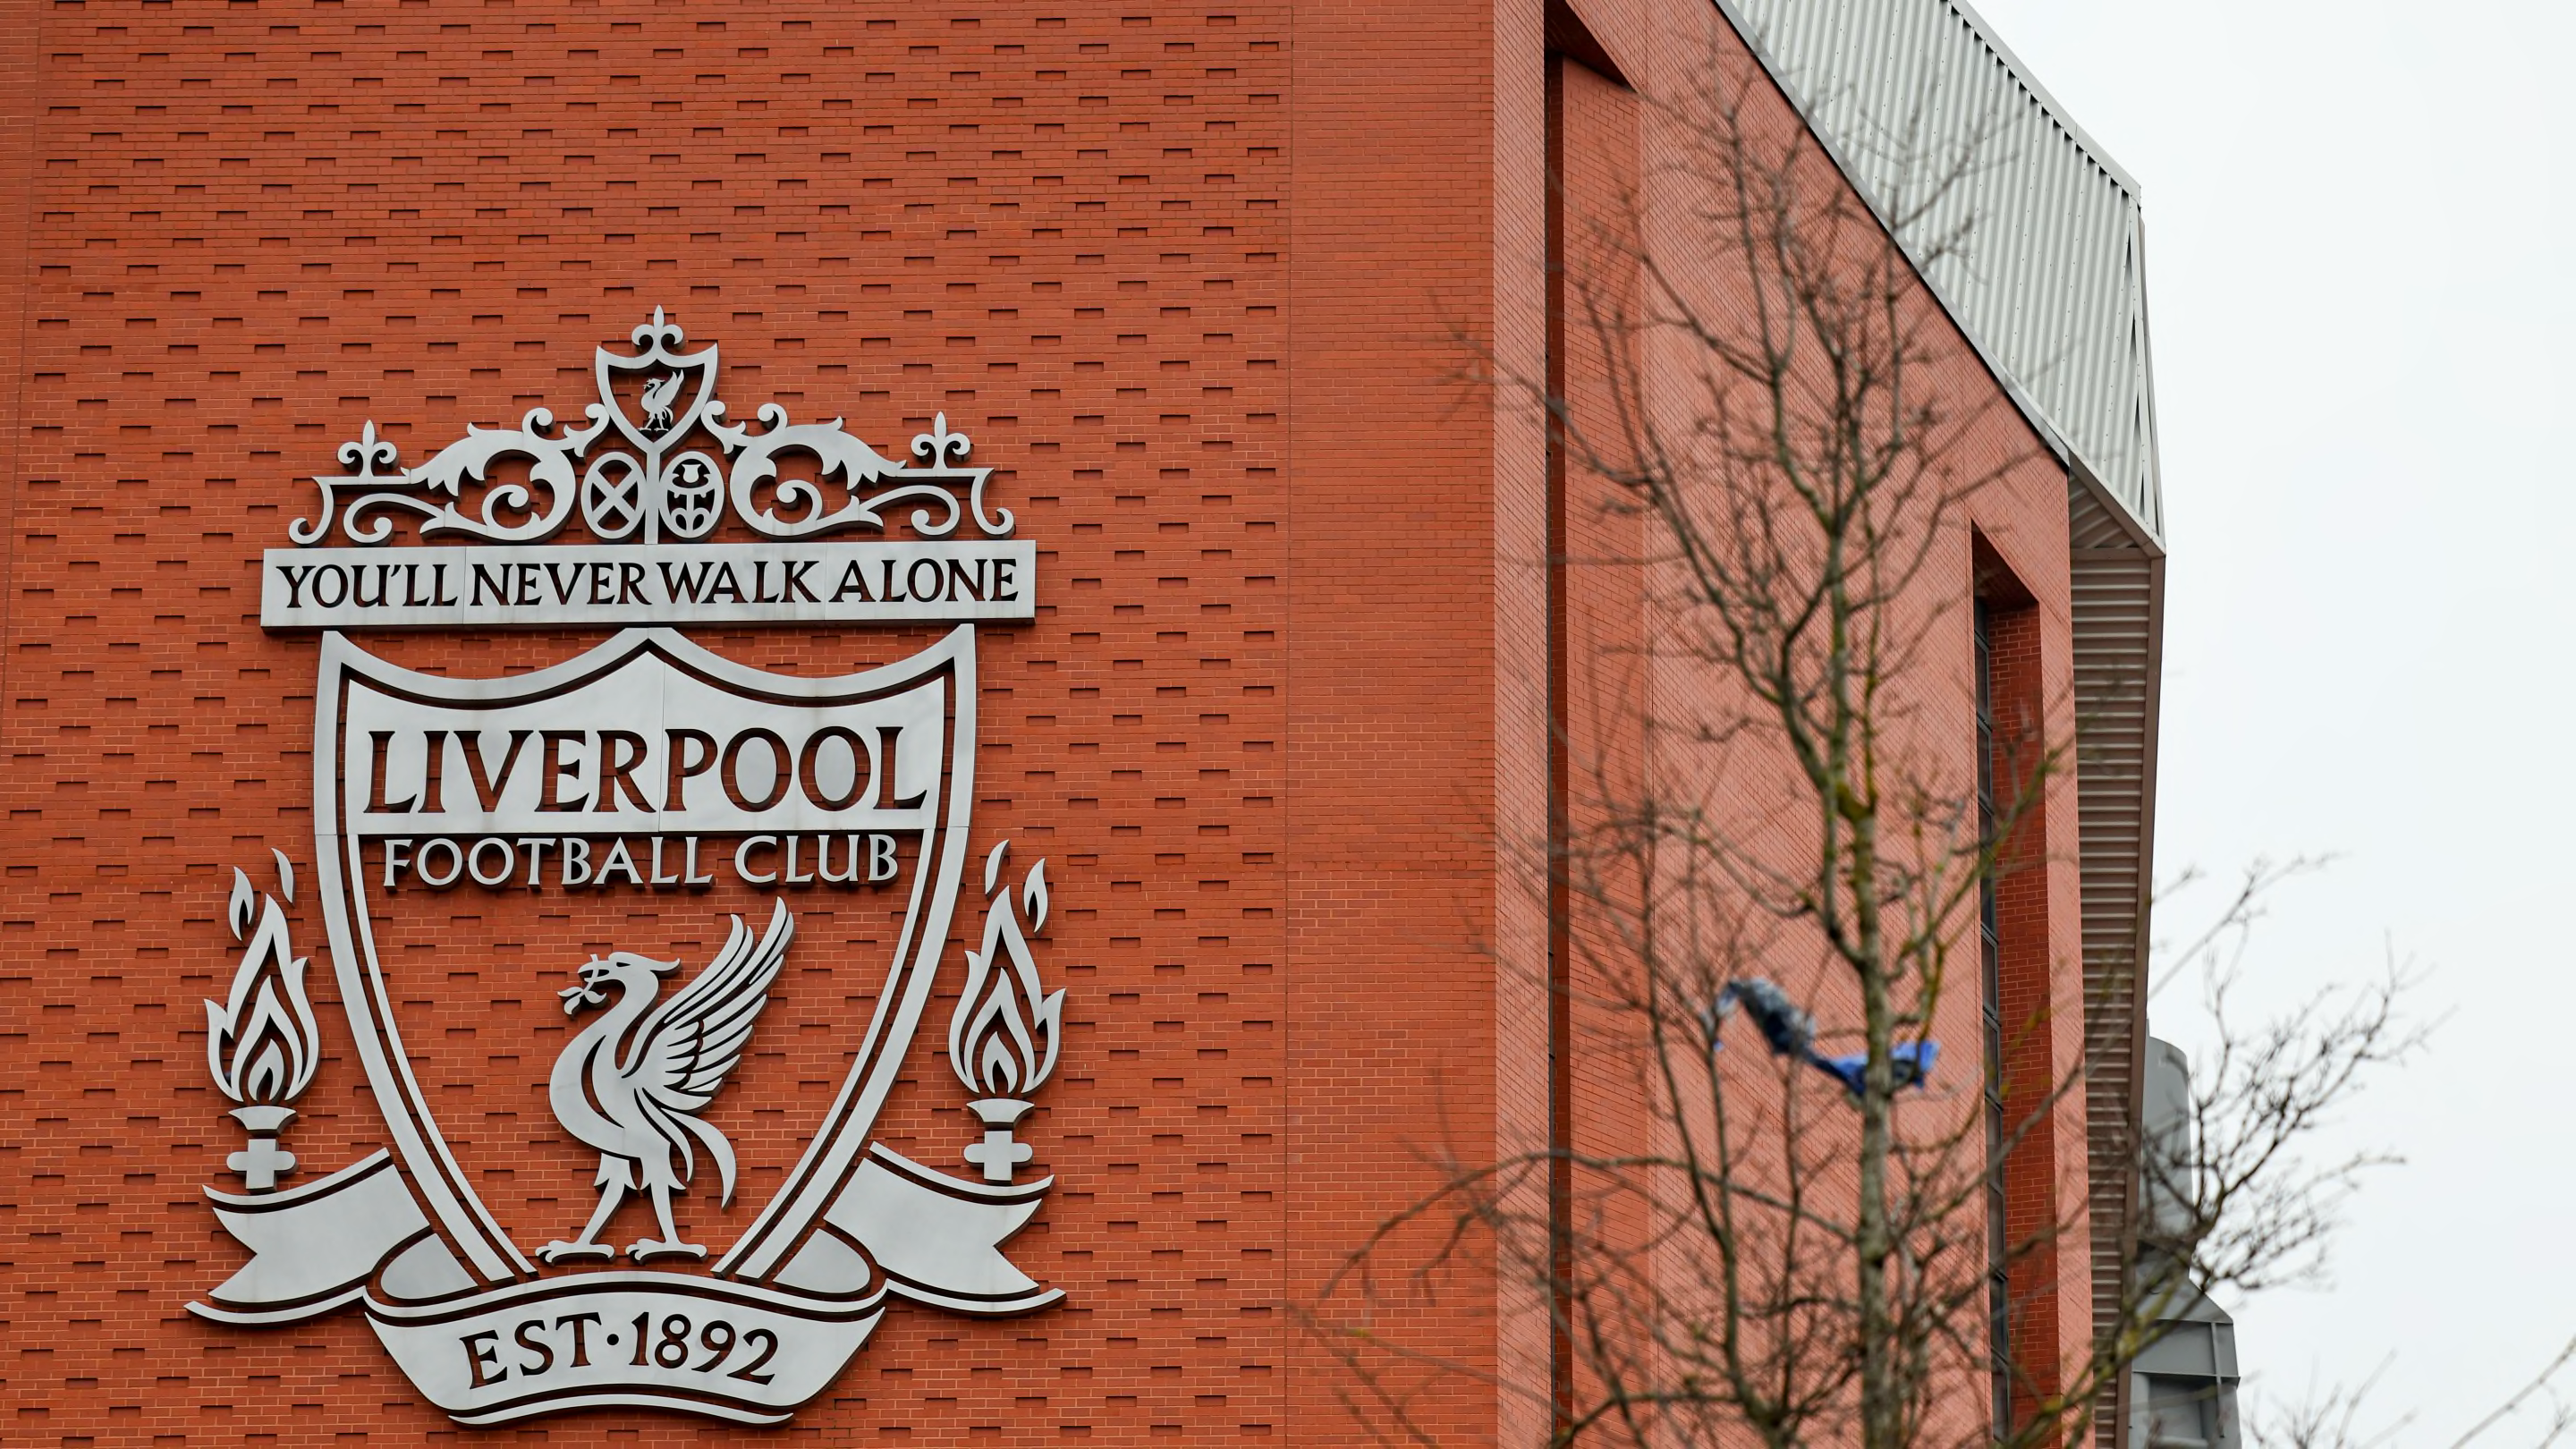 3 signings Liverpool need to make to compete with Man City and Arsenal